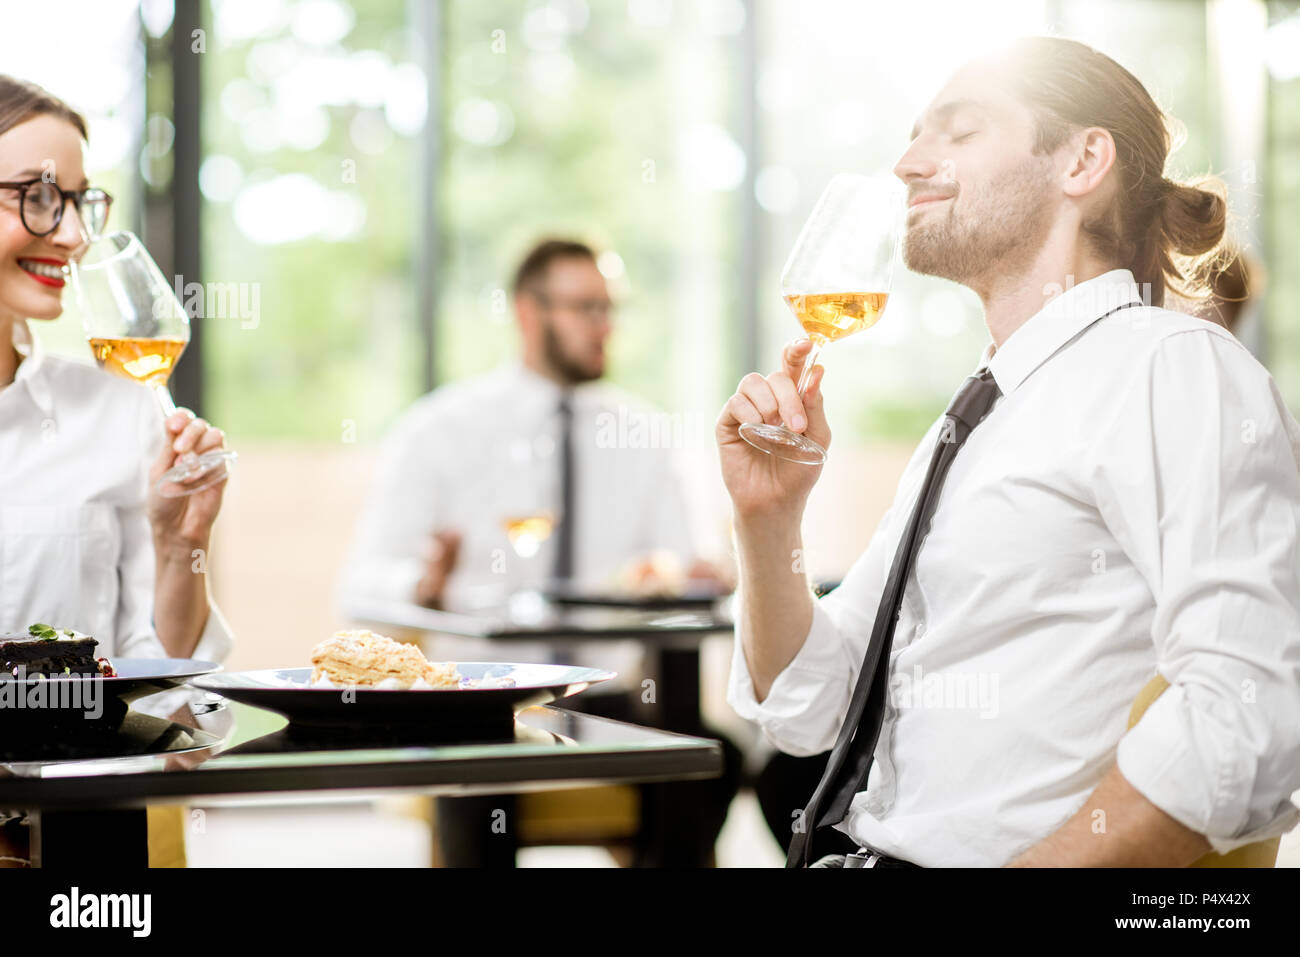 Business people during a lunch at the restaurant Stock Photo